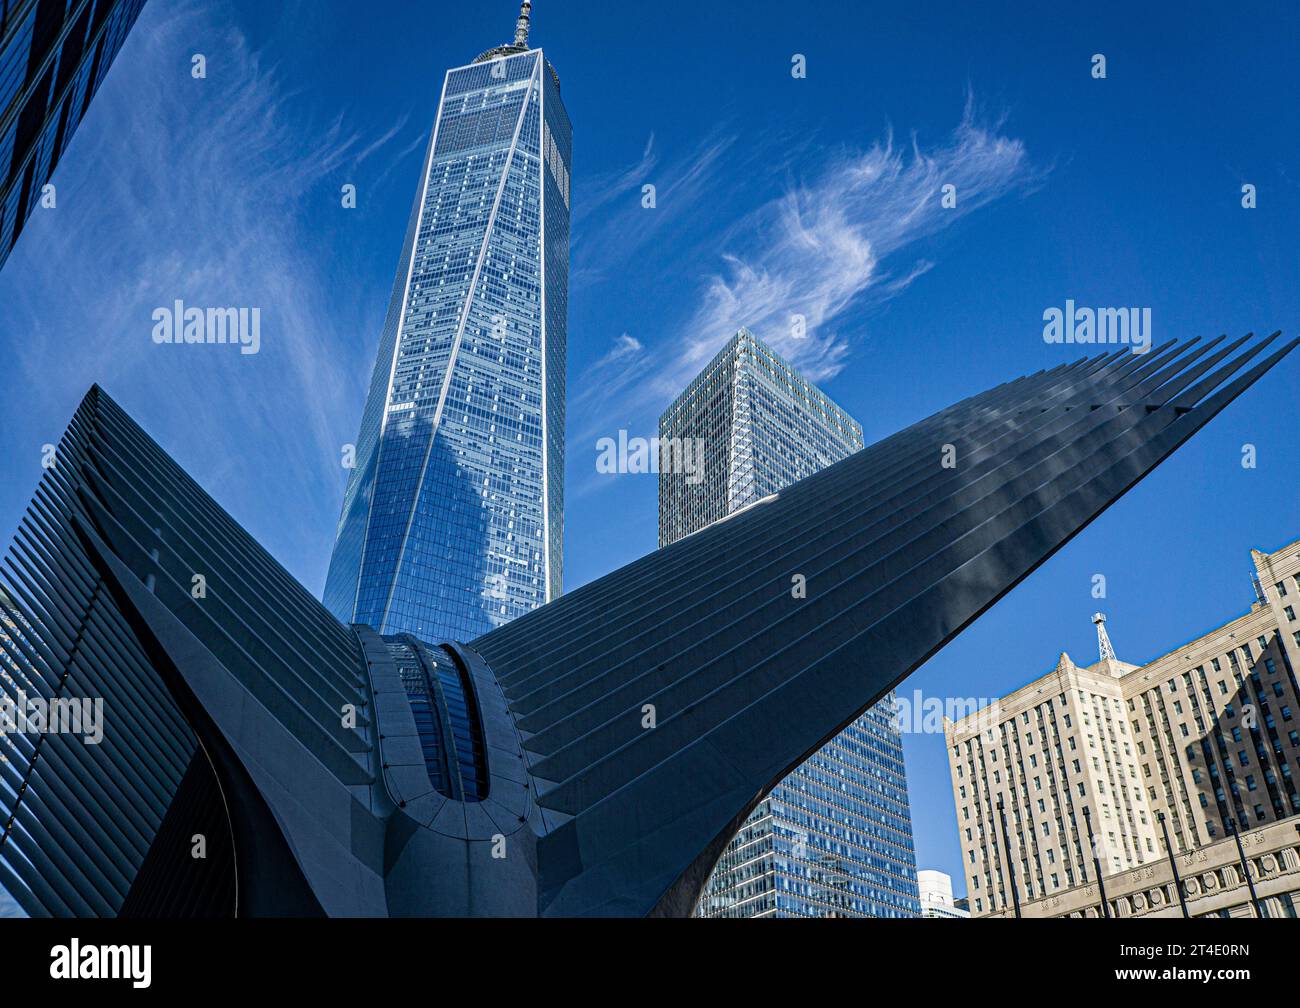 Low angle view of One World Trade Center and the Oculus transportation hub, Financial District, New York City, New York, USA Stock Photo